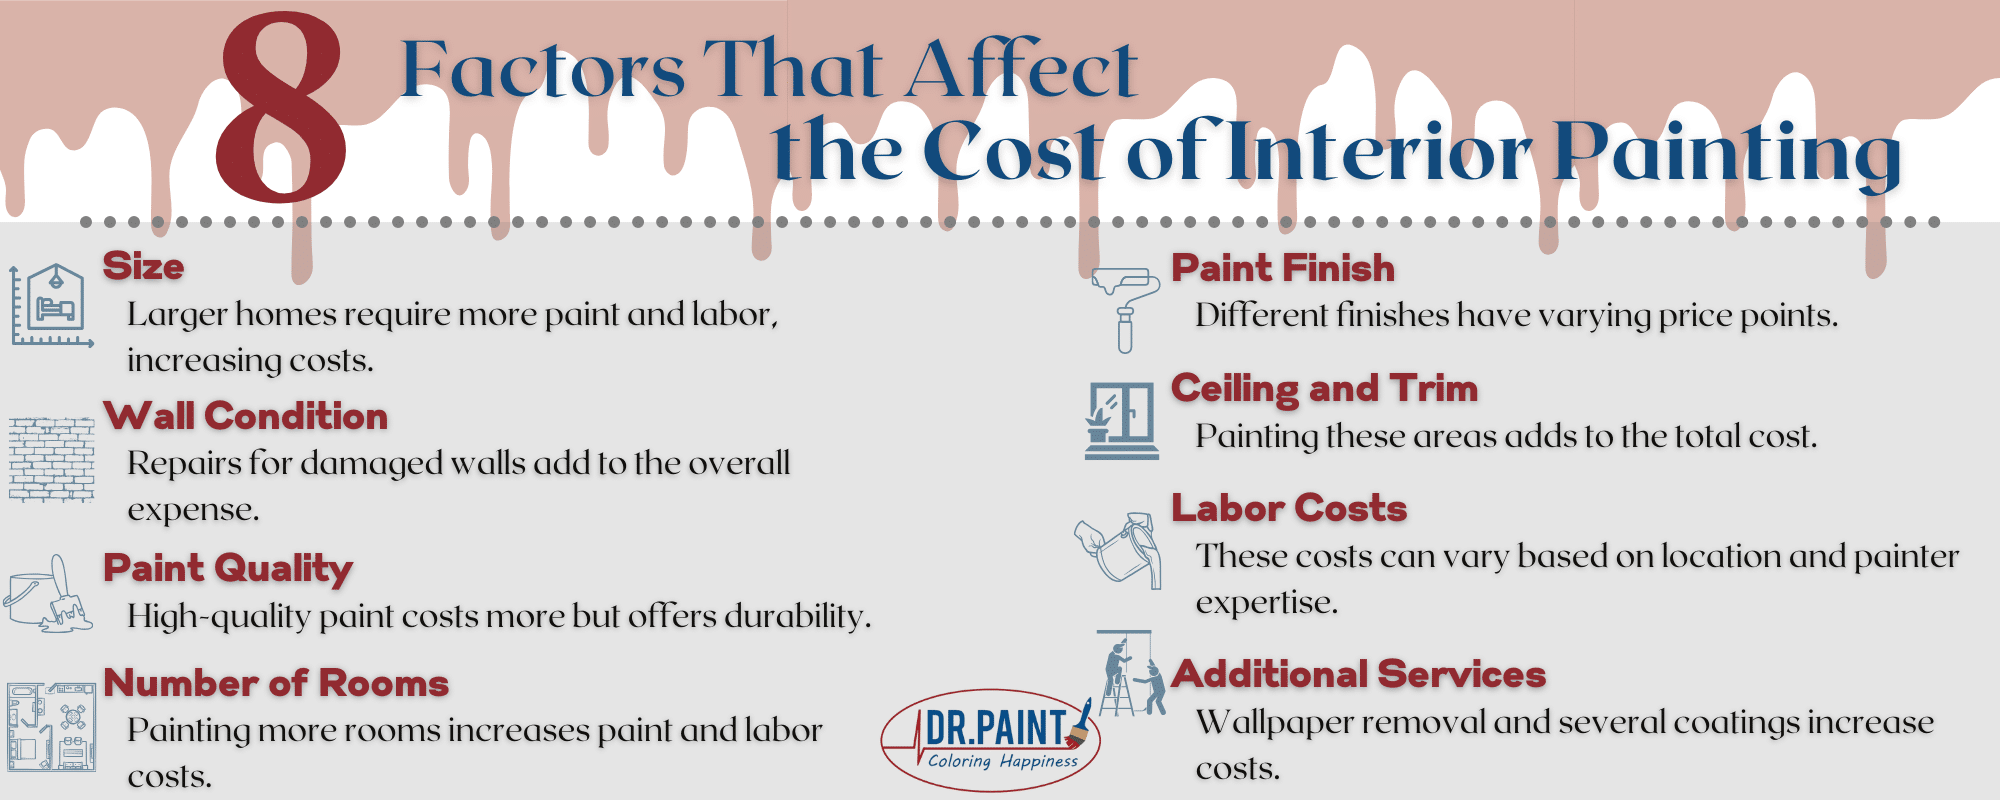 8 Factors That Affect the Cost of Interior Painting

Size: Larger homes require more paint and labor, increasing costs.
Wall Condition: Repairs for damaged walls add to the overall expense.
Paint Quality: High-quality paint costs more but offers durability.
Number of Rooms: Painting more rooms increases paint and labor costs.
Paint Finish: Different finishes have varying price points.
Ceiling and Trim: Painting these areas adds to the total cost.
Labor Costs: These costs can vary based on location and painter expertise.
Additional Services: Wallpaper removal and several coatings increase costs.